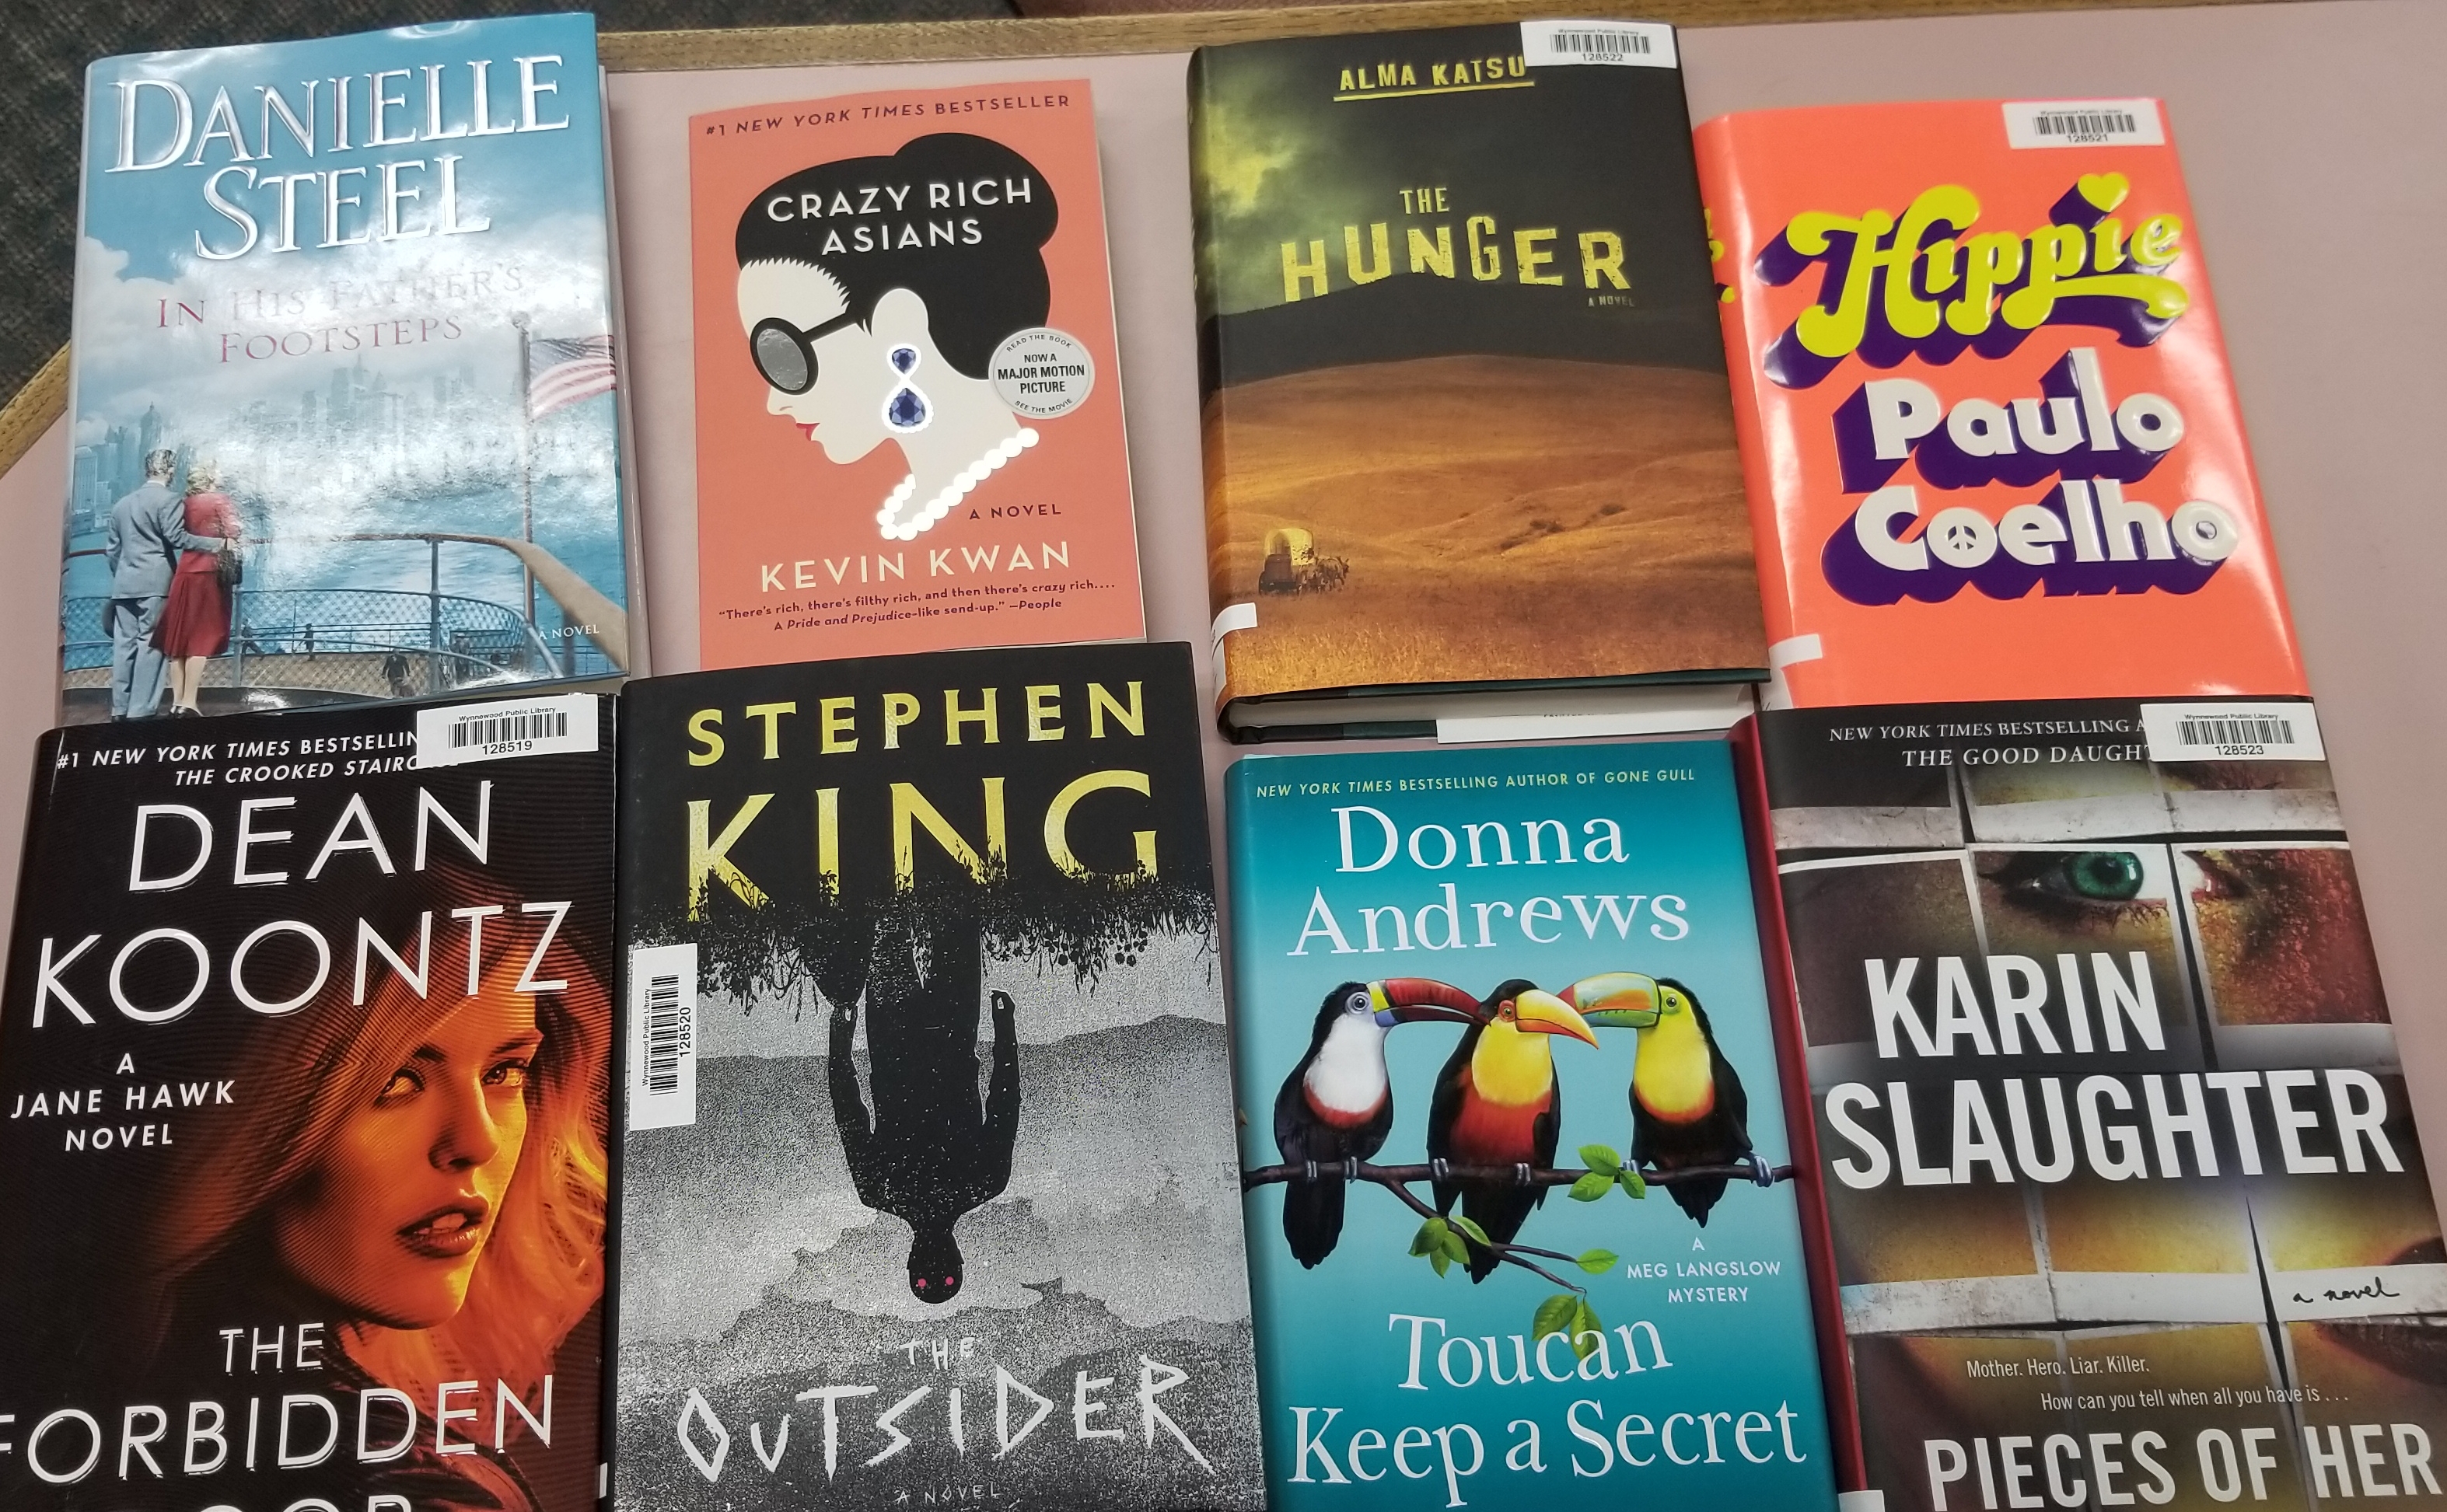 books displayed on a counter. Danielle steel, dean koontz, stephen king, the hunger, kevin kwan, donna andrews, paulo coelho